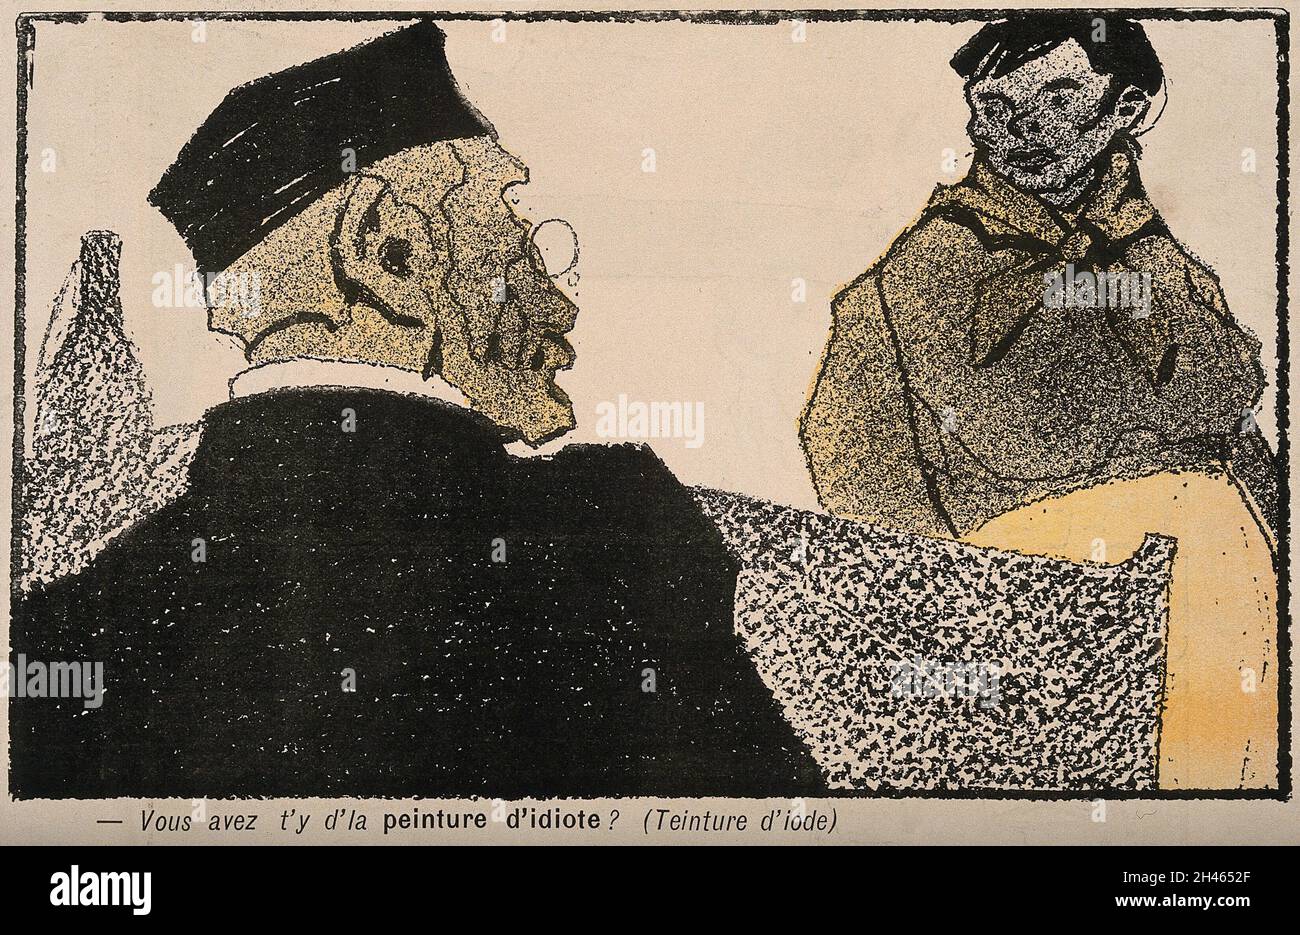 A customer at a pharmacy makes a verbal gaffe when asking for iodine. Colour photomechanical reproduction of a lithograph, c. 1900. Stock Photo